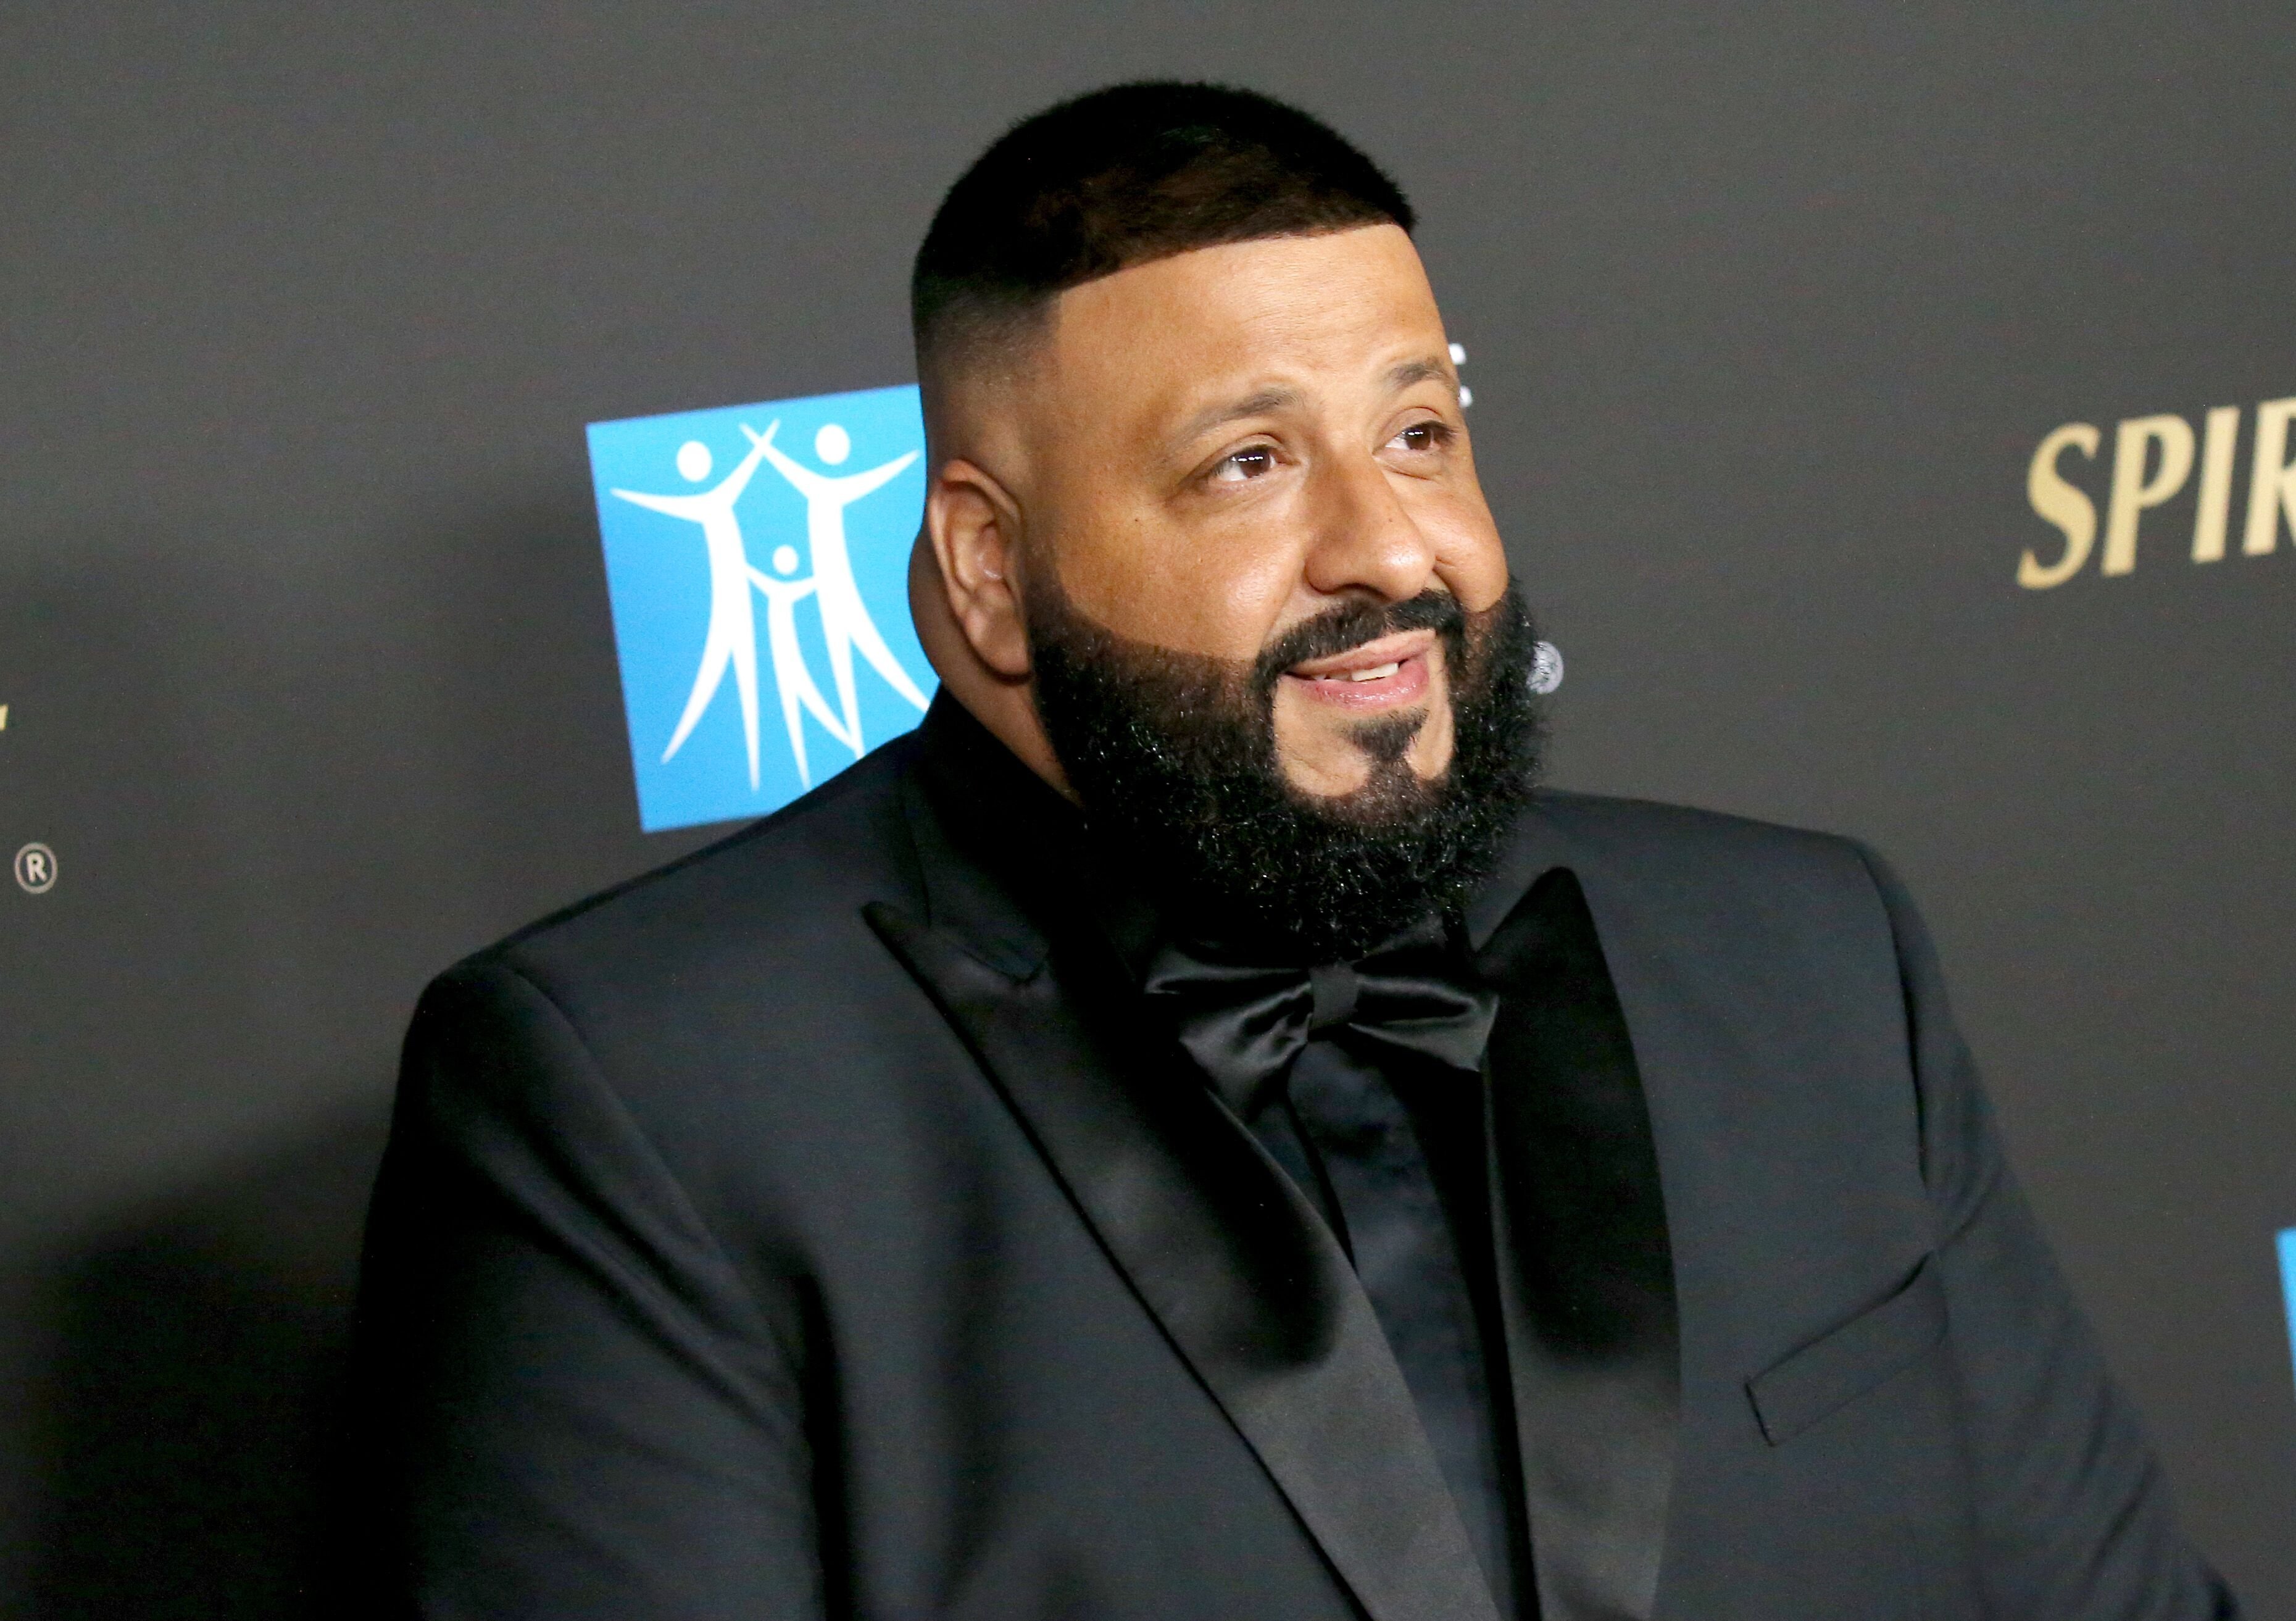 DJ Khaled at the City Of Hope's "Spirit of Life" gala in October 2019. | Photo: Getty Images